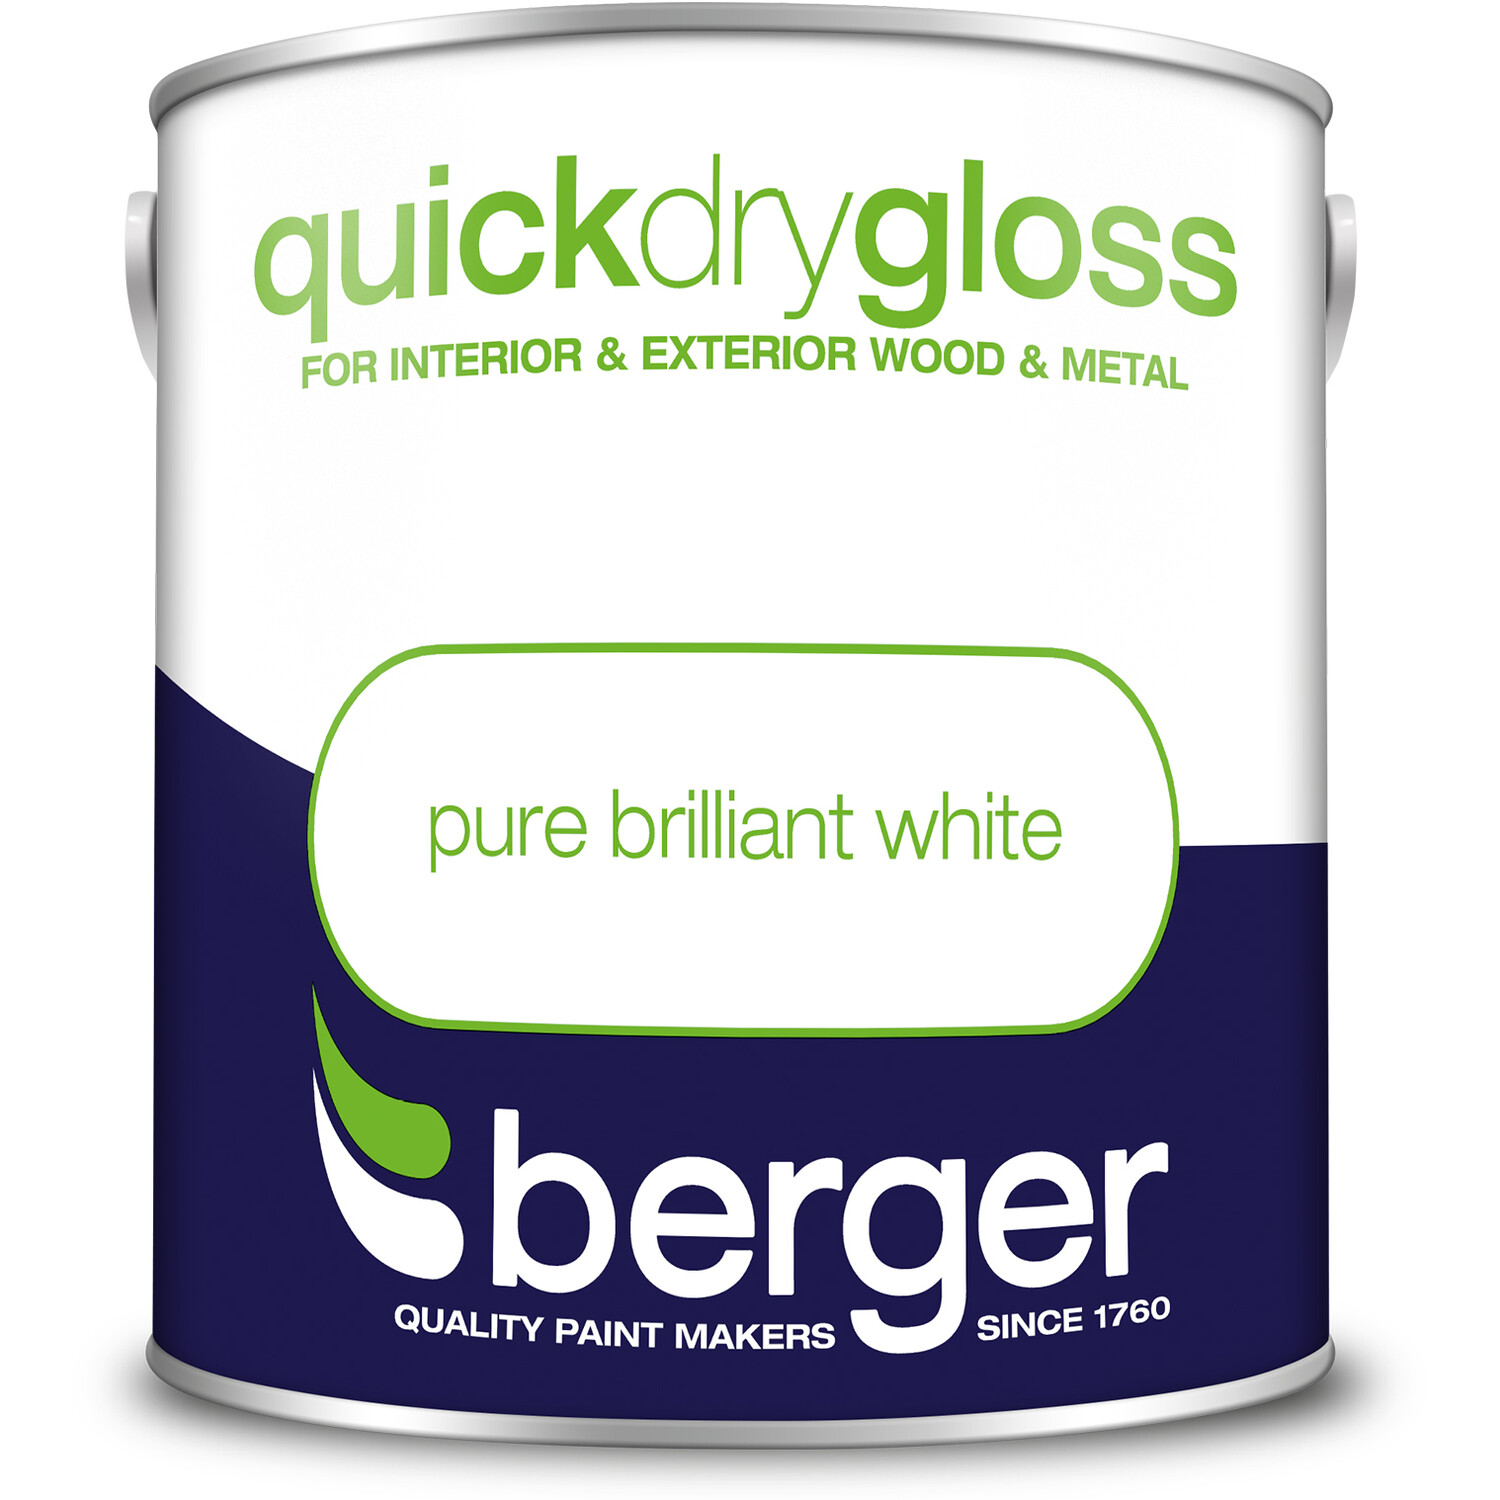 Berger Wood and Metal Pure Brilliant White Quick Dry Gloss Paint 2.5L Image 2